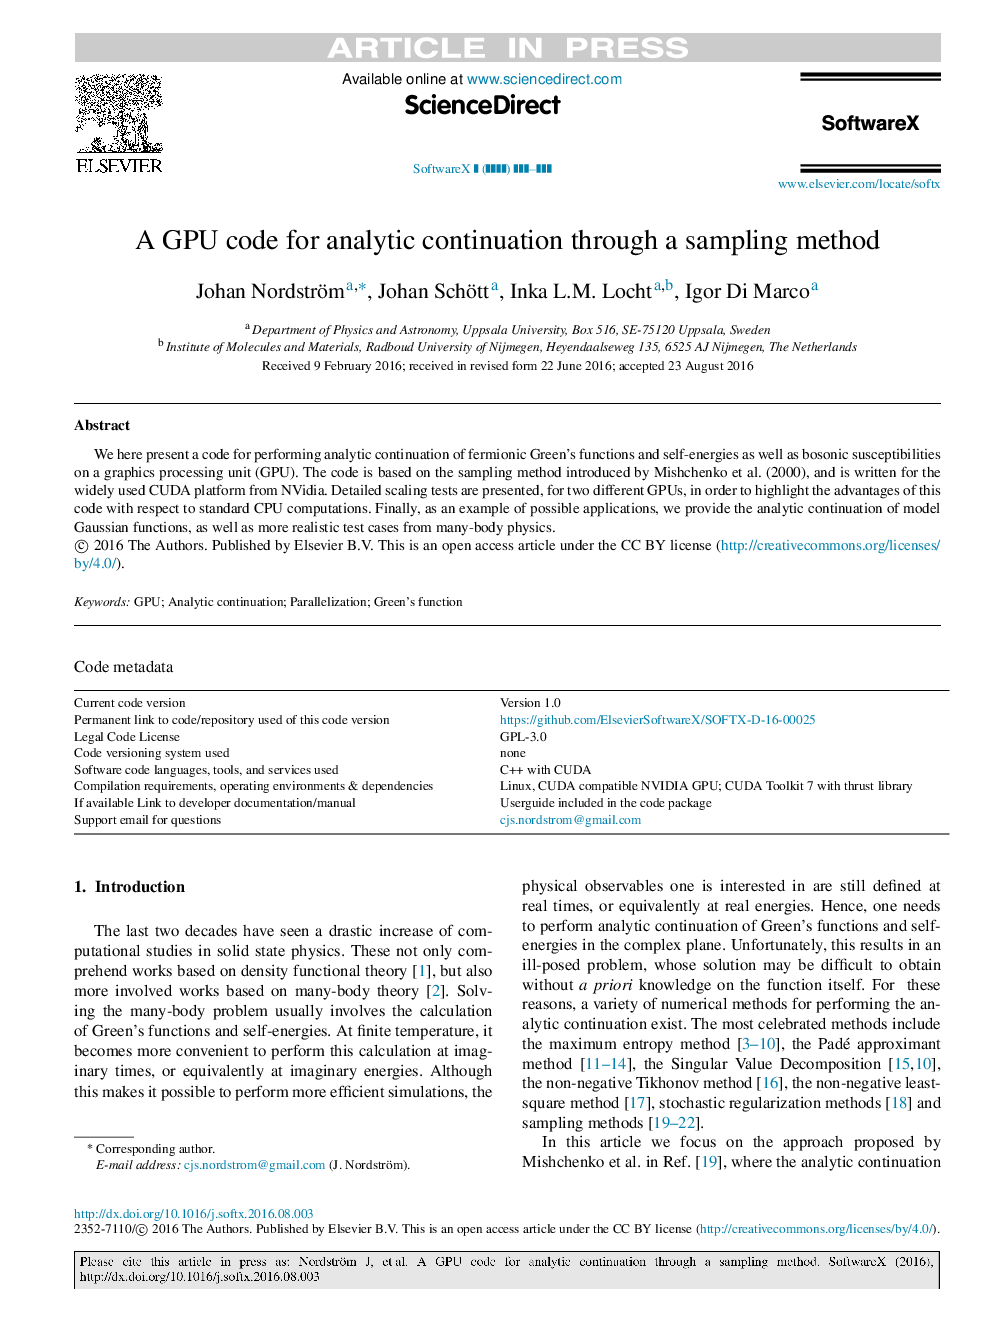 A GPU code for analytic continuation through a sampling method